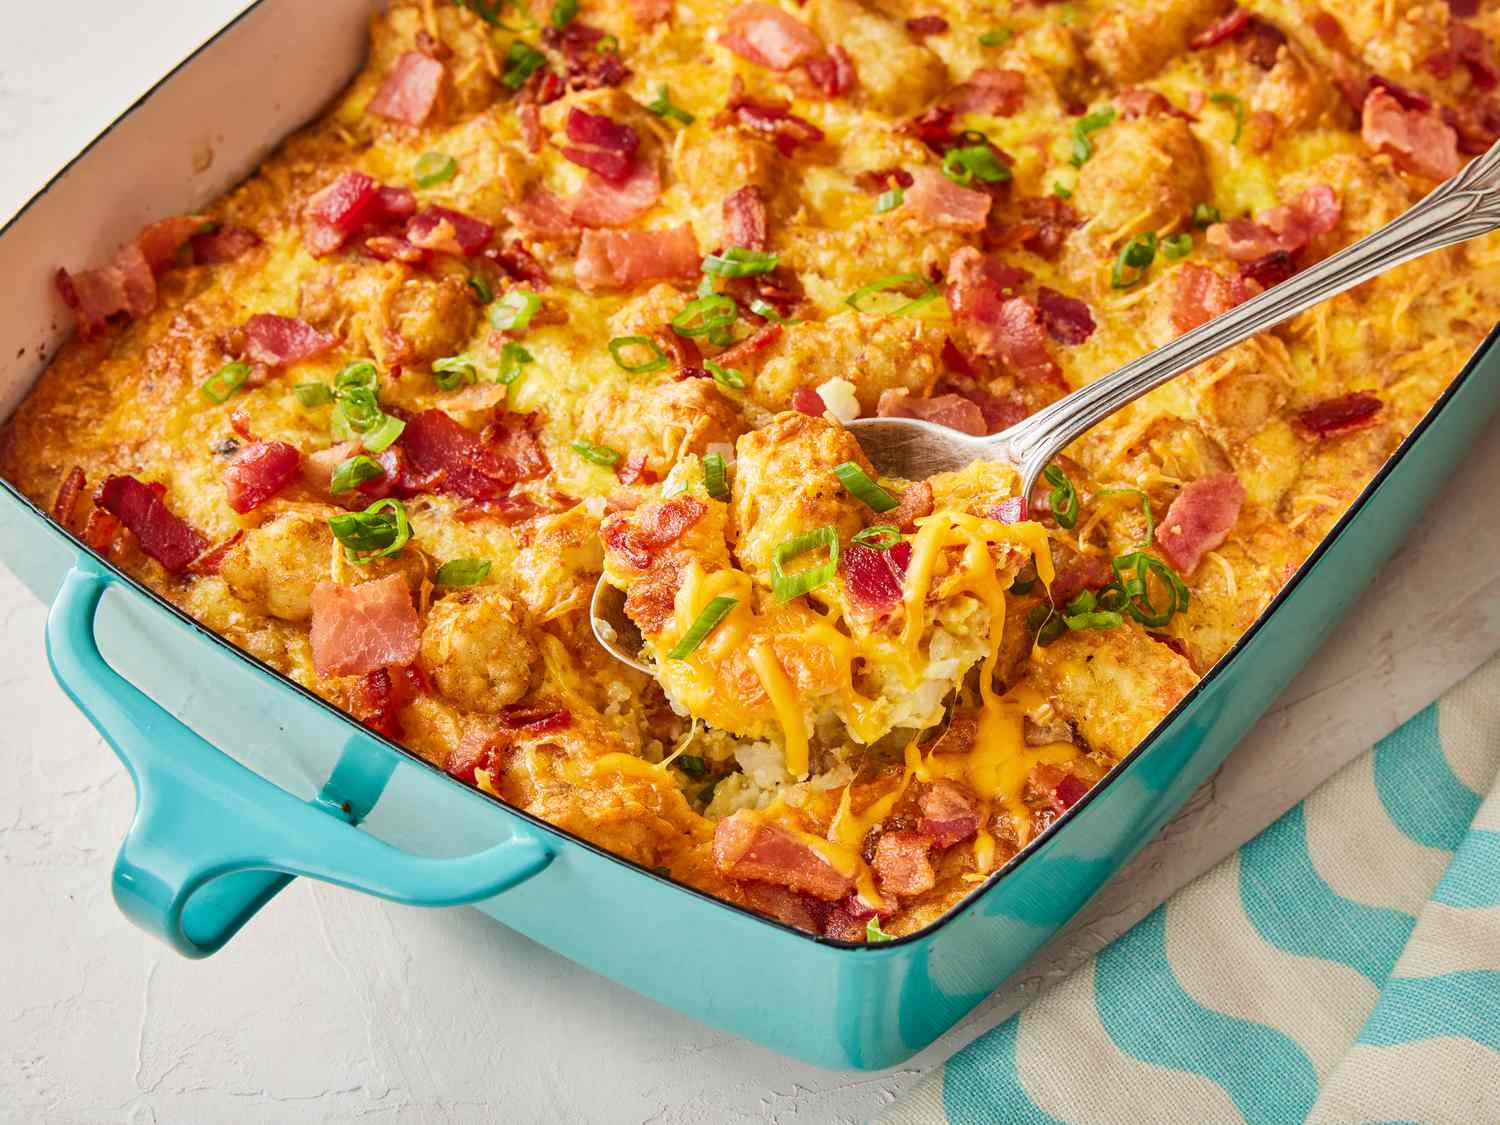 Tater Tot и Bacon Breakfast Corconose